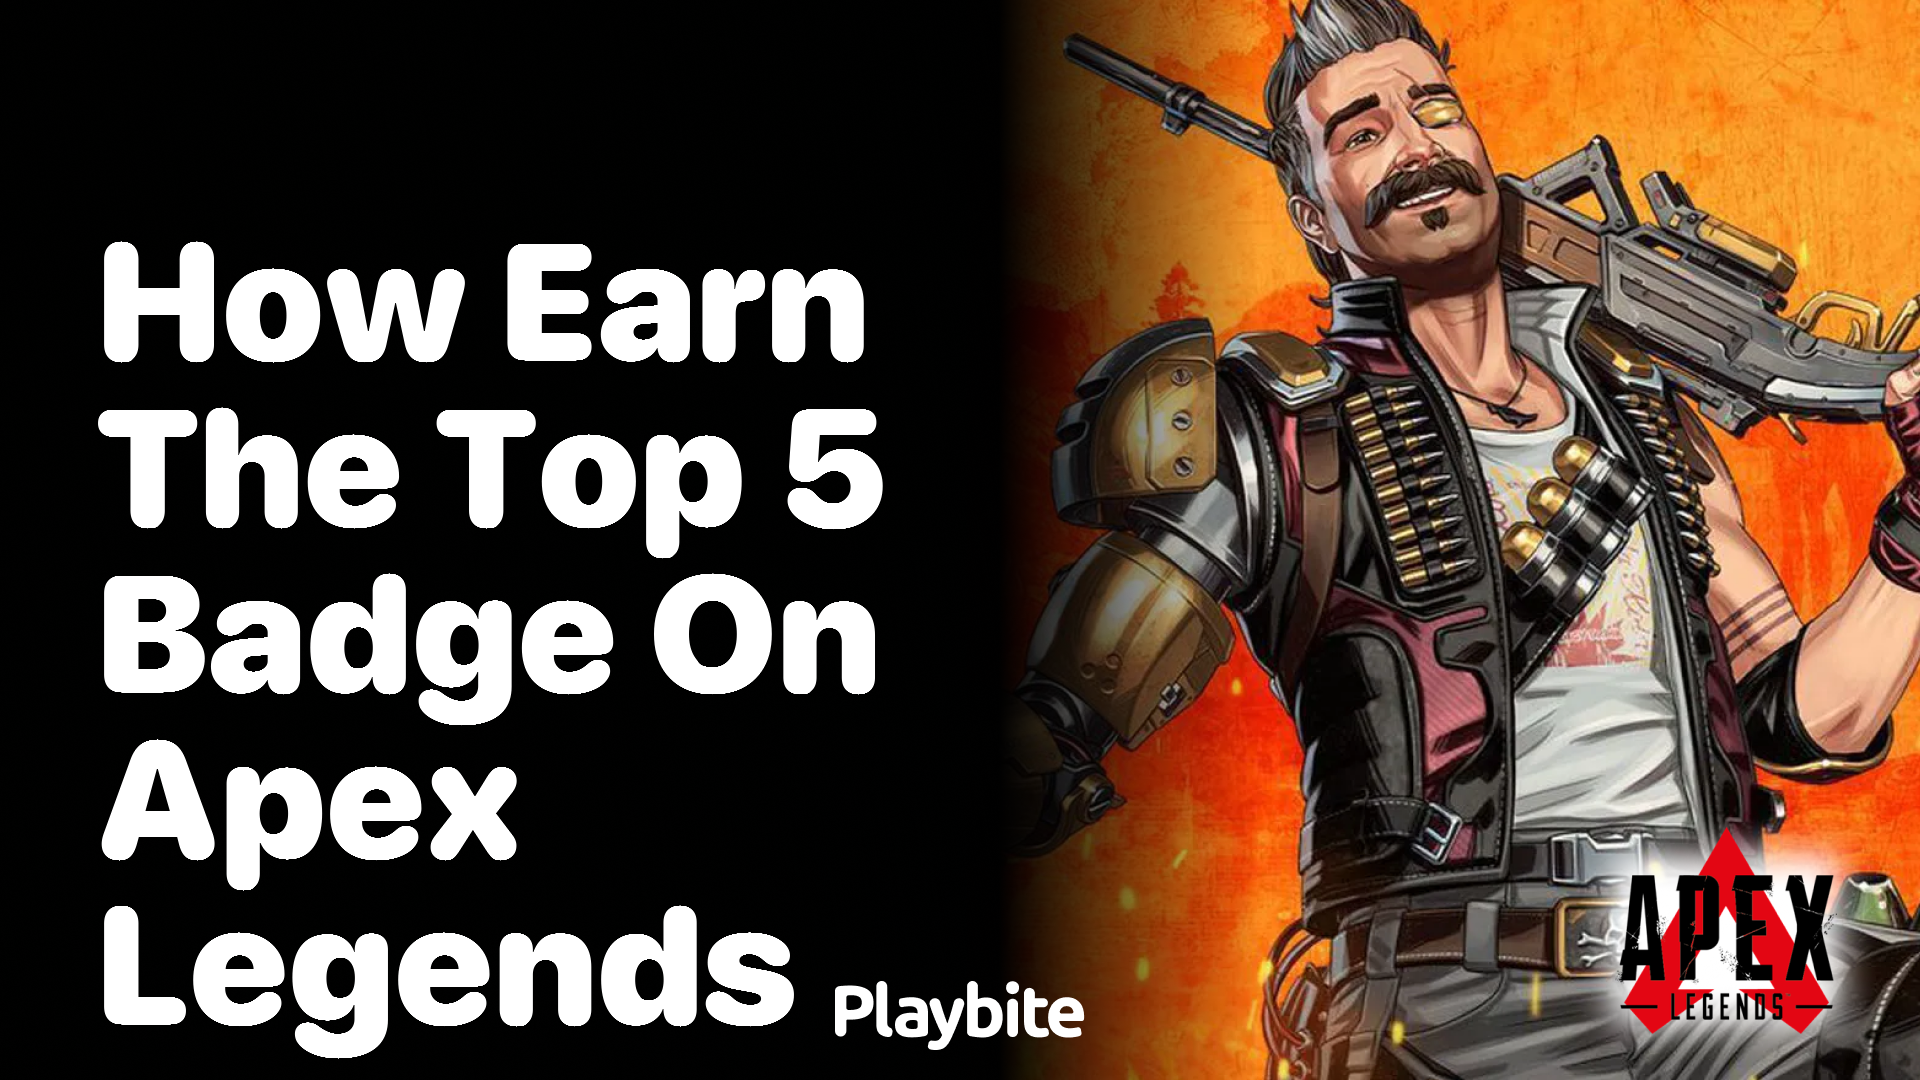 How to Earn the Top 5 Badge in Apex Legends